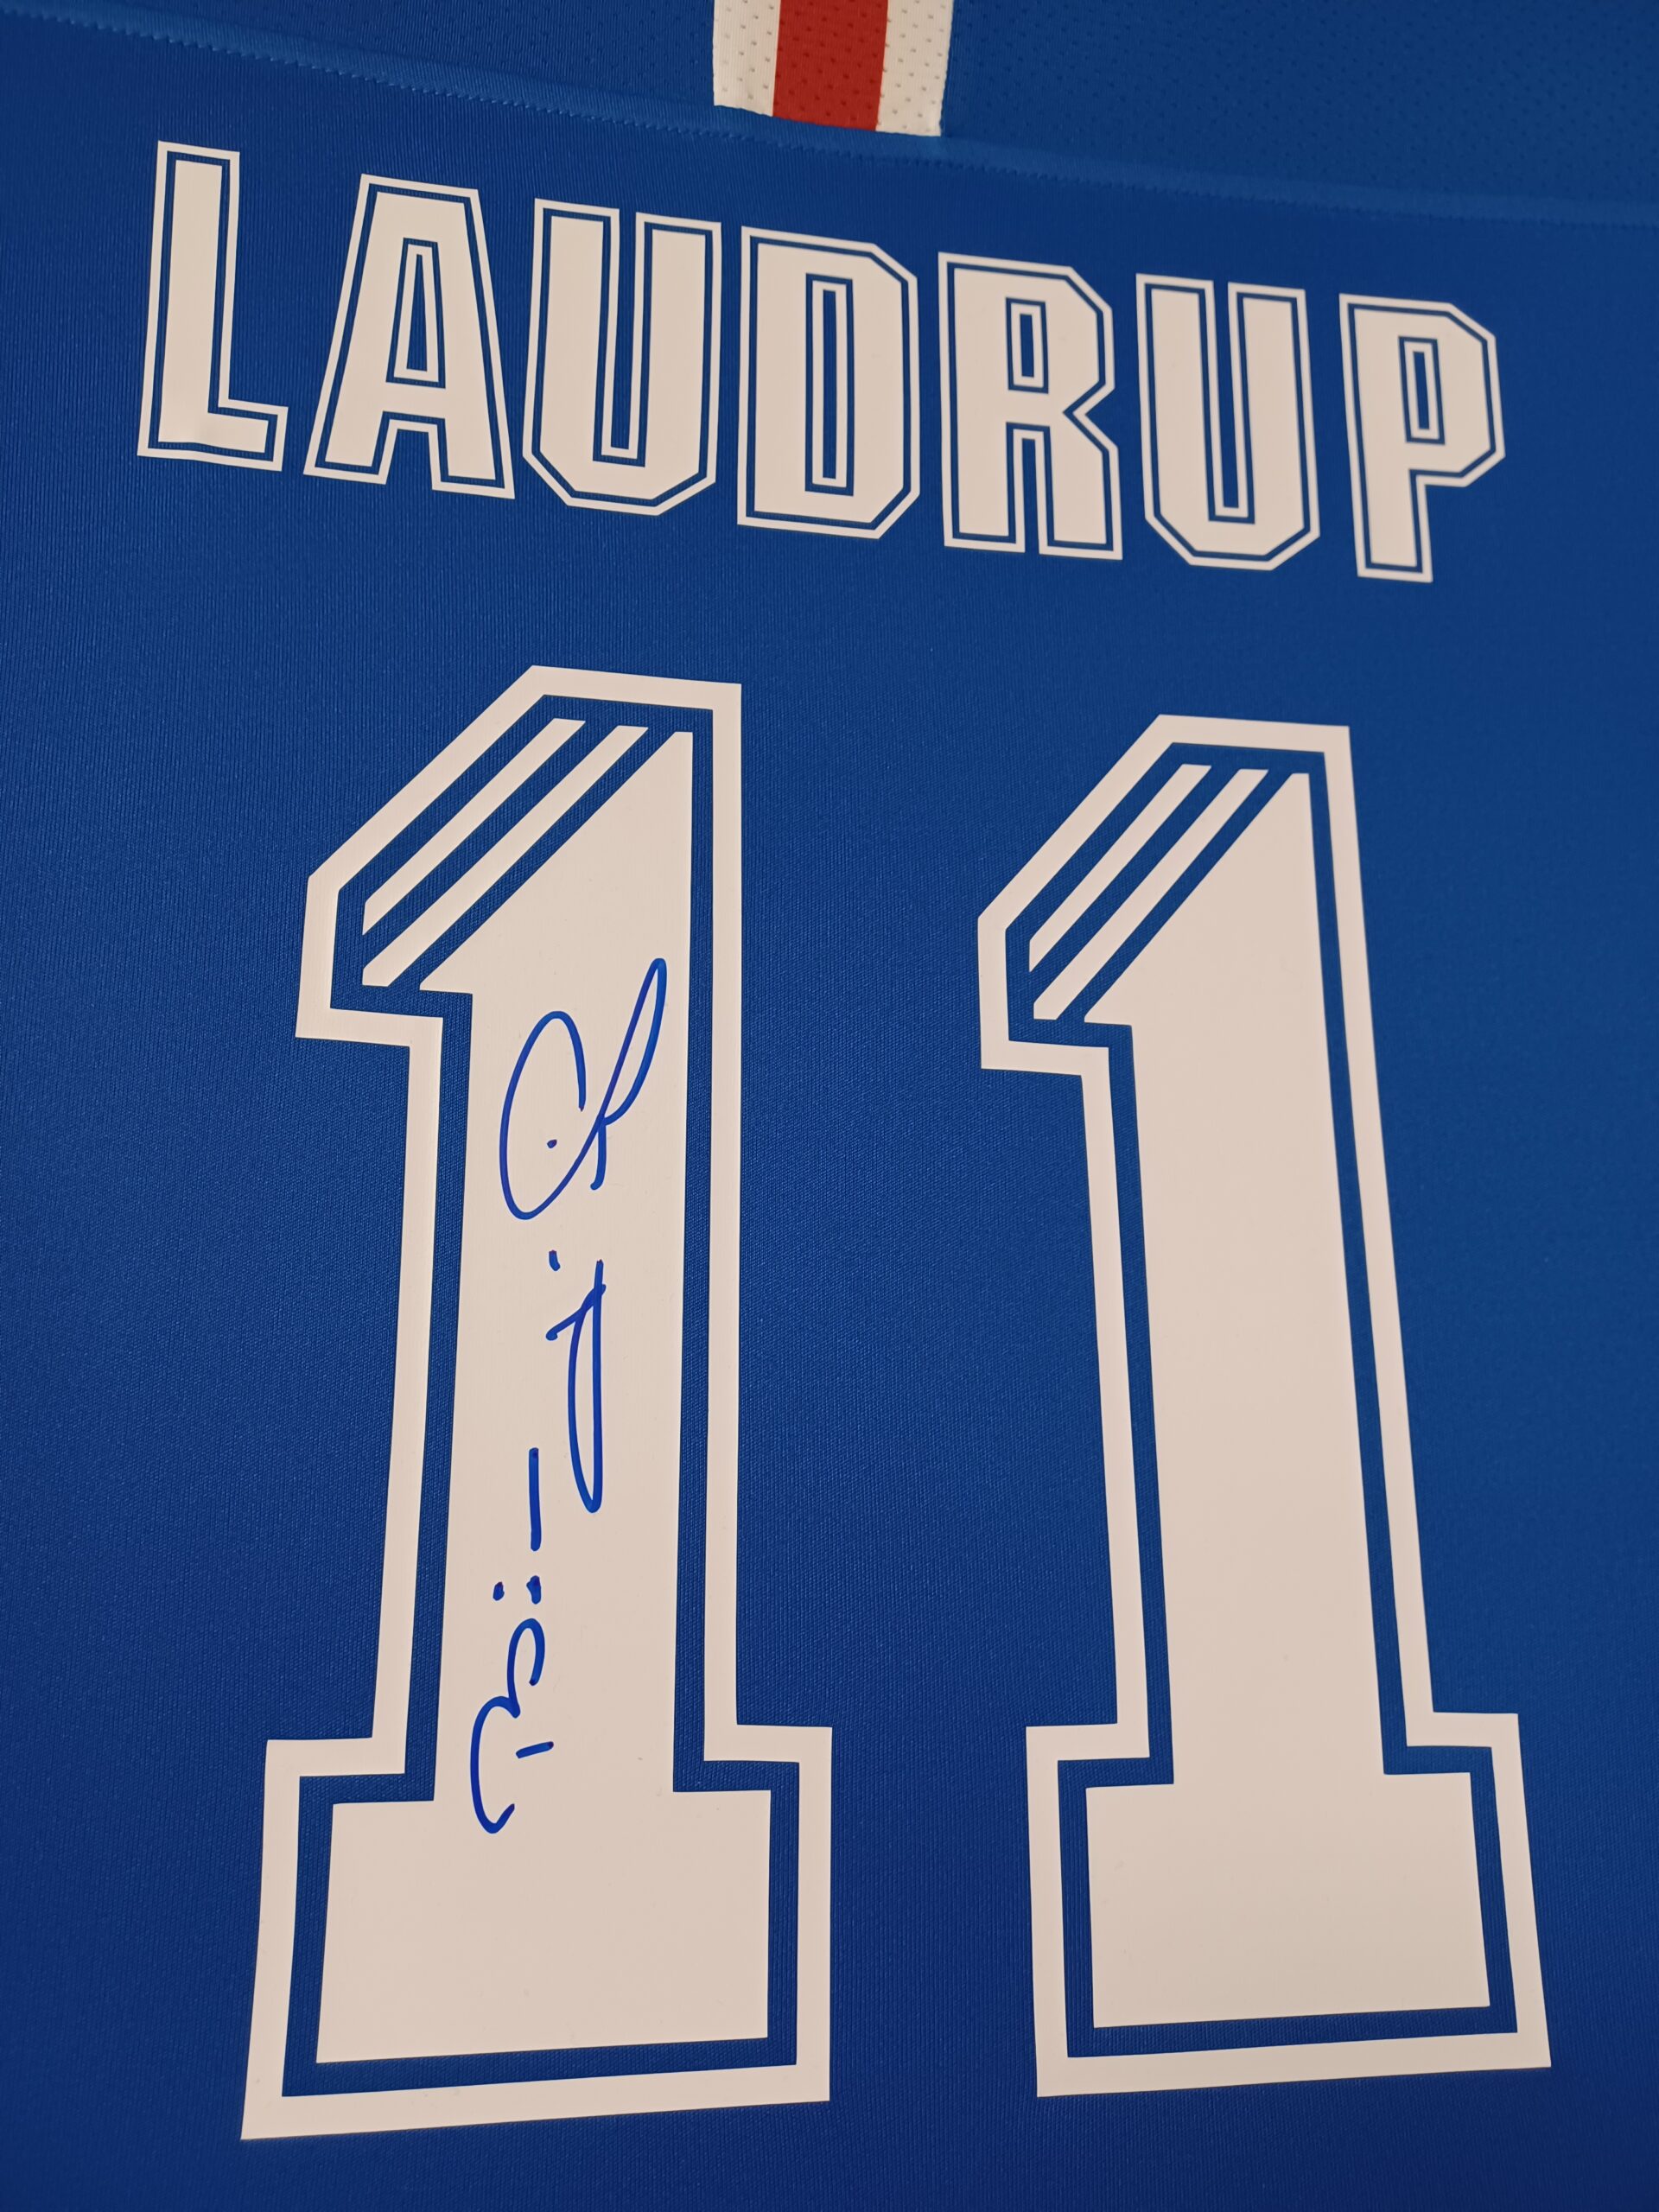 BRIAN LAUDRUP SIGNED SHIRT